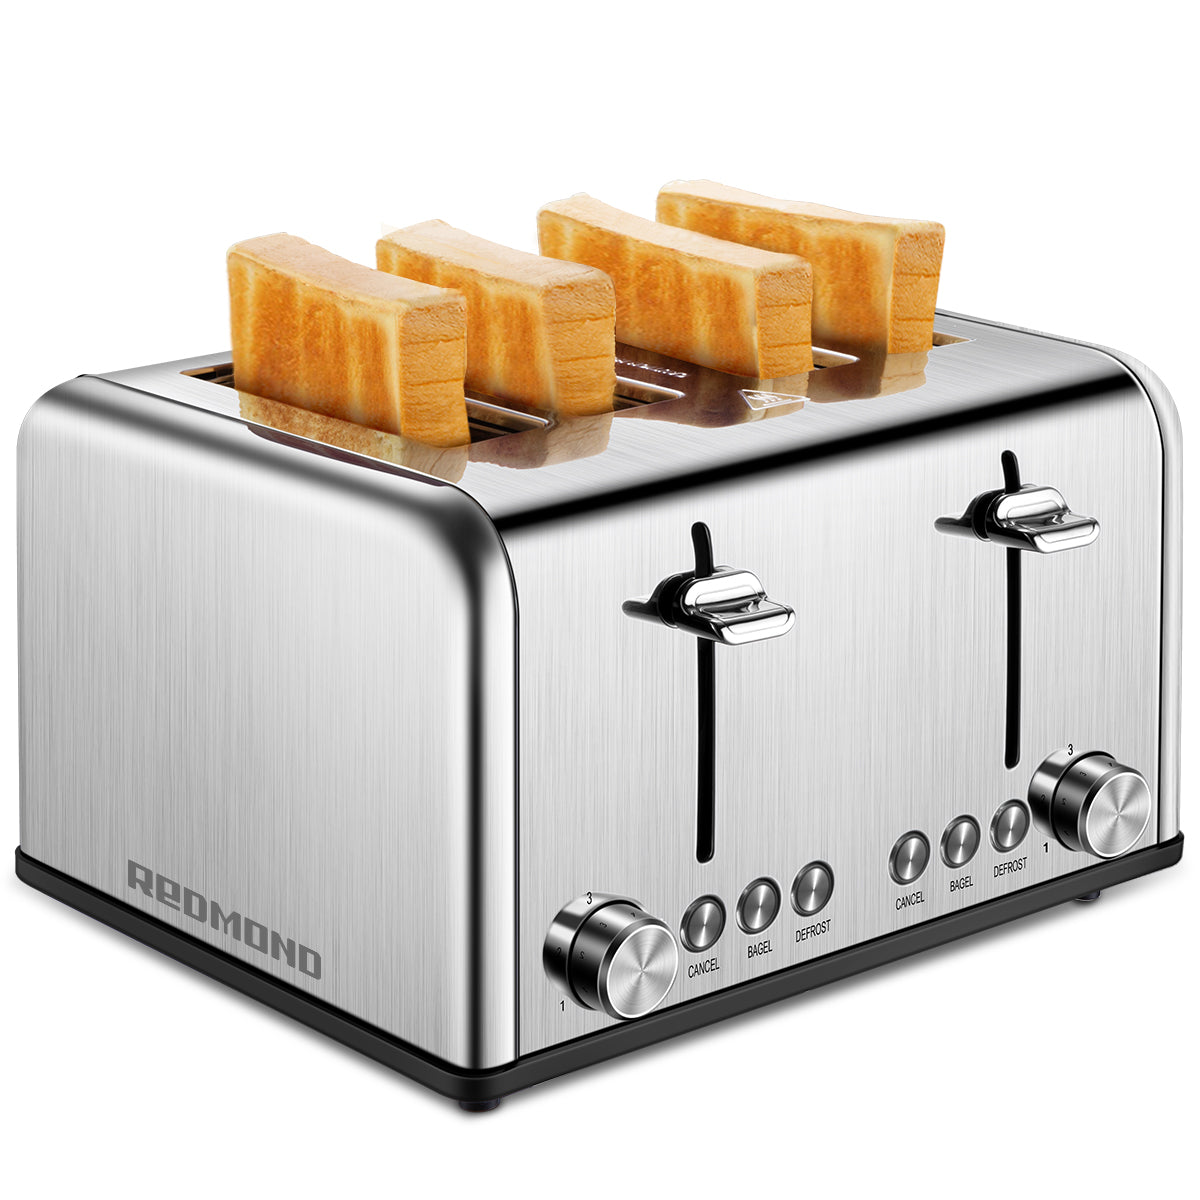 4 slice toaster with long cord